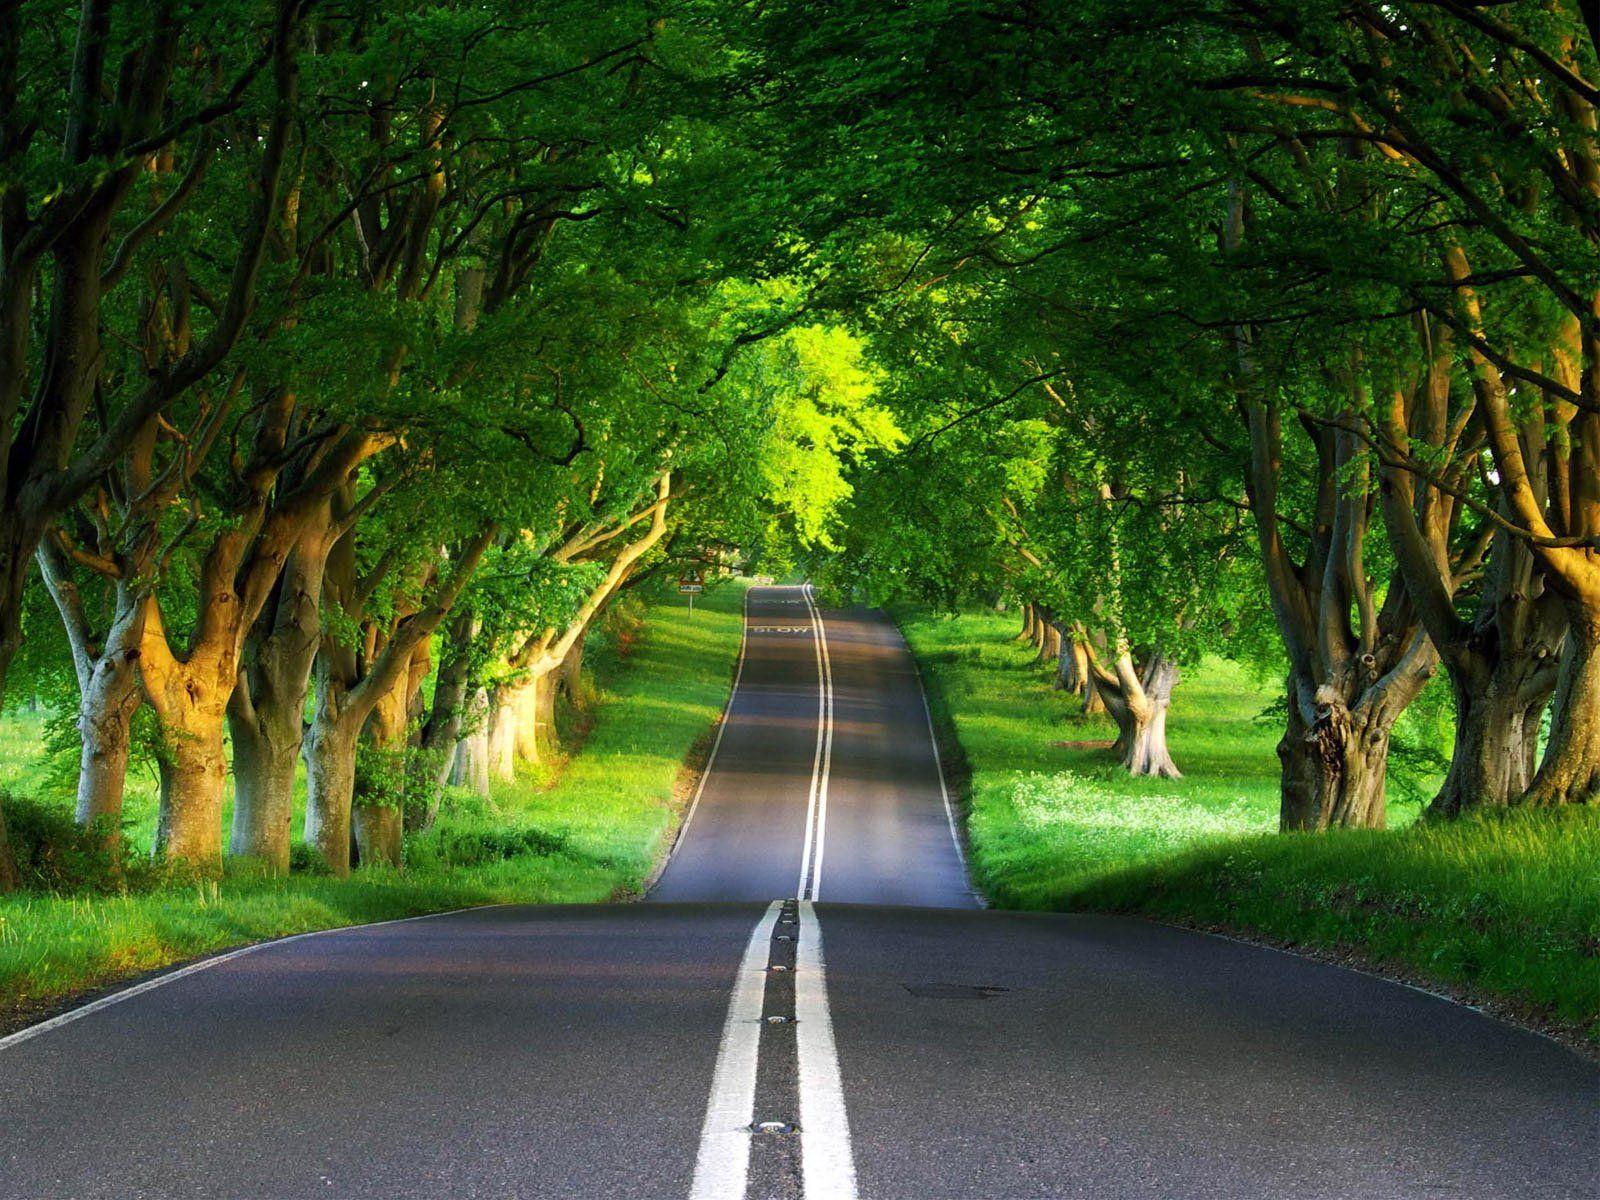 Summer nature scenery road trees fence grass sun wallpaper